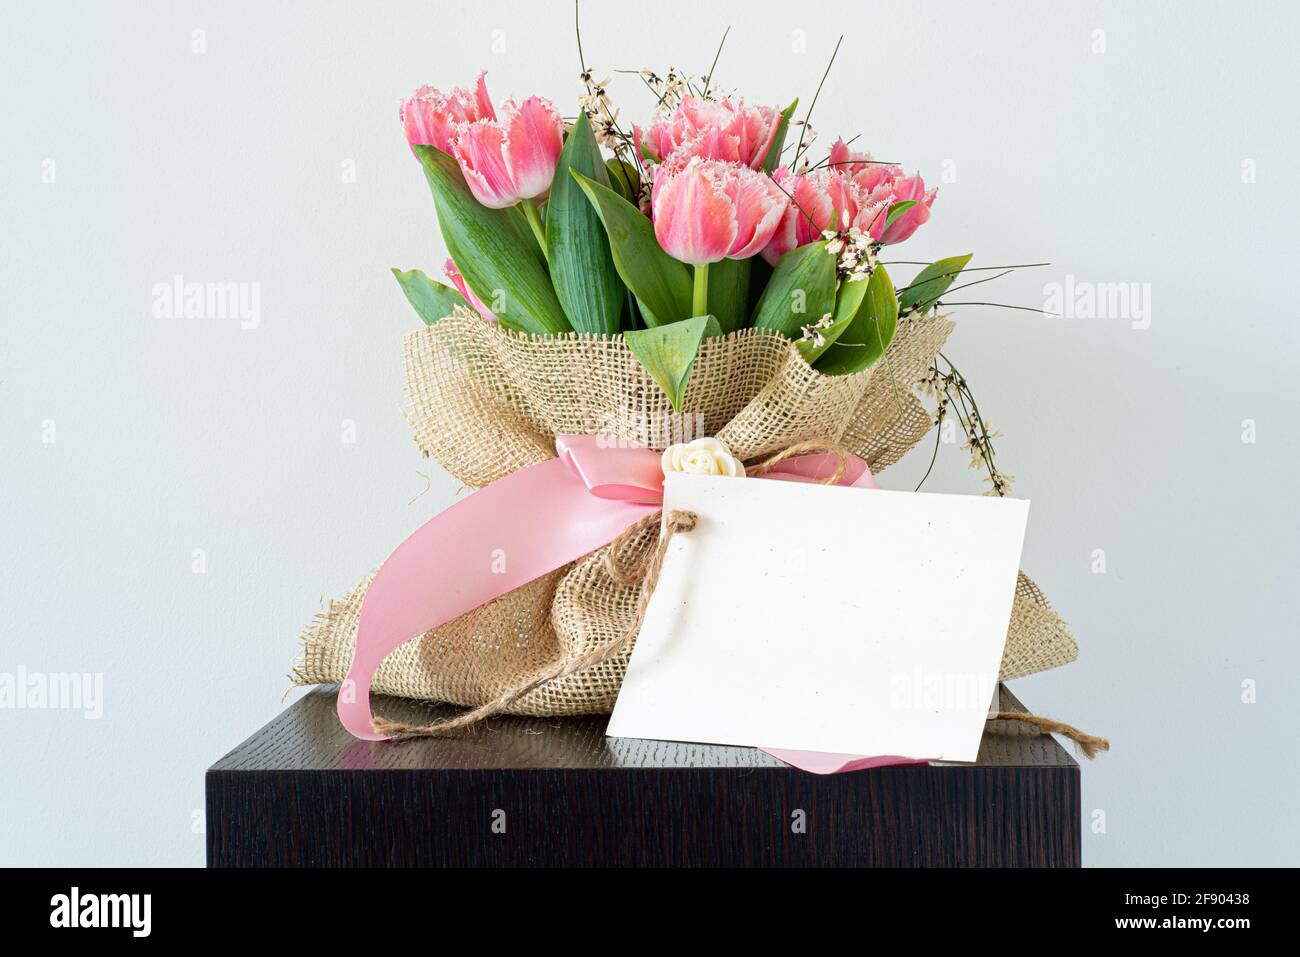 Blank paper greeting card, invitation. Bouquet of fresh pink tulips wrapped in burlap fabric (jute). Elegant wooden perch of interior design. Wedding, Stock Photo